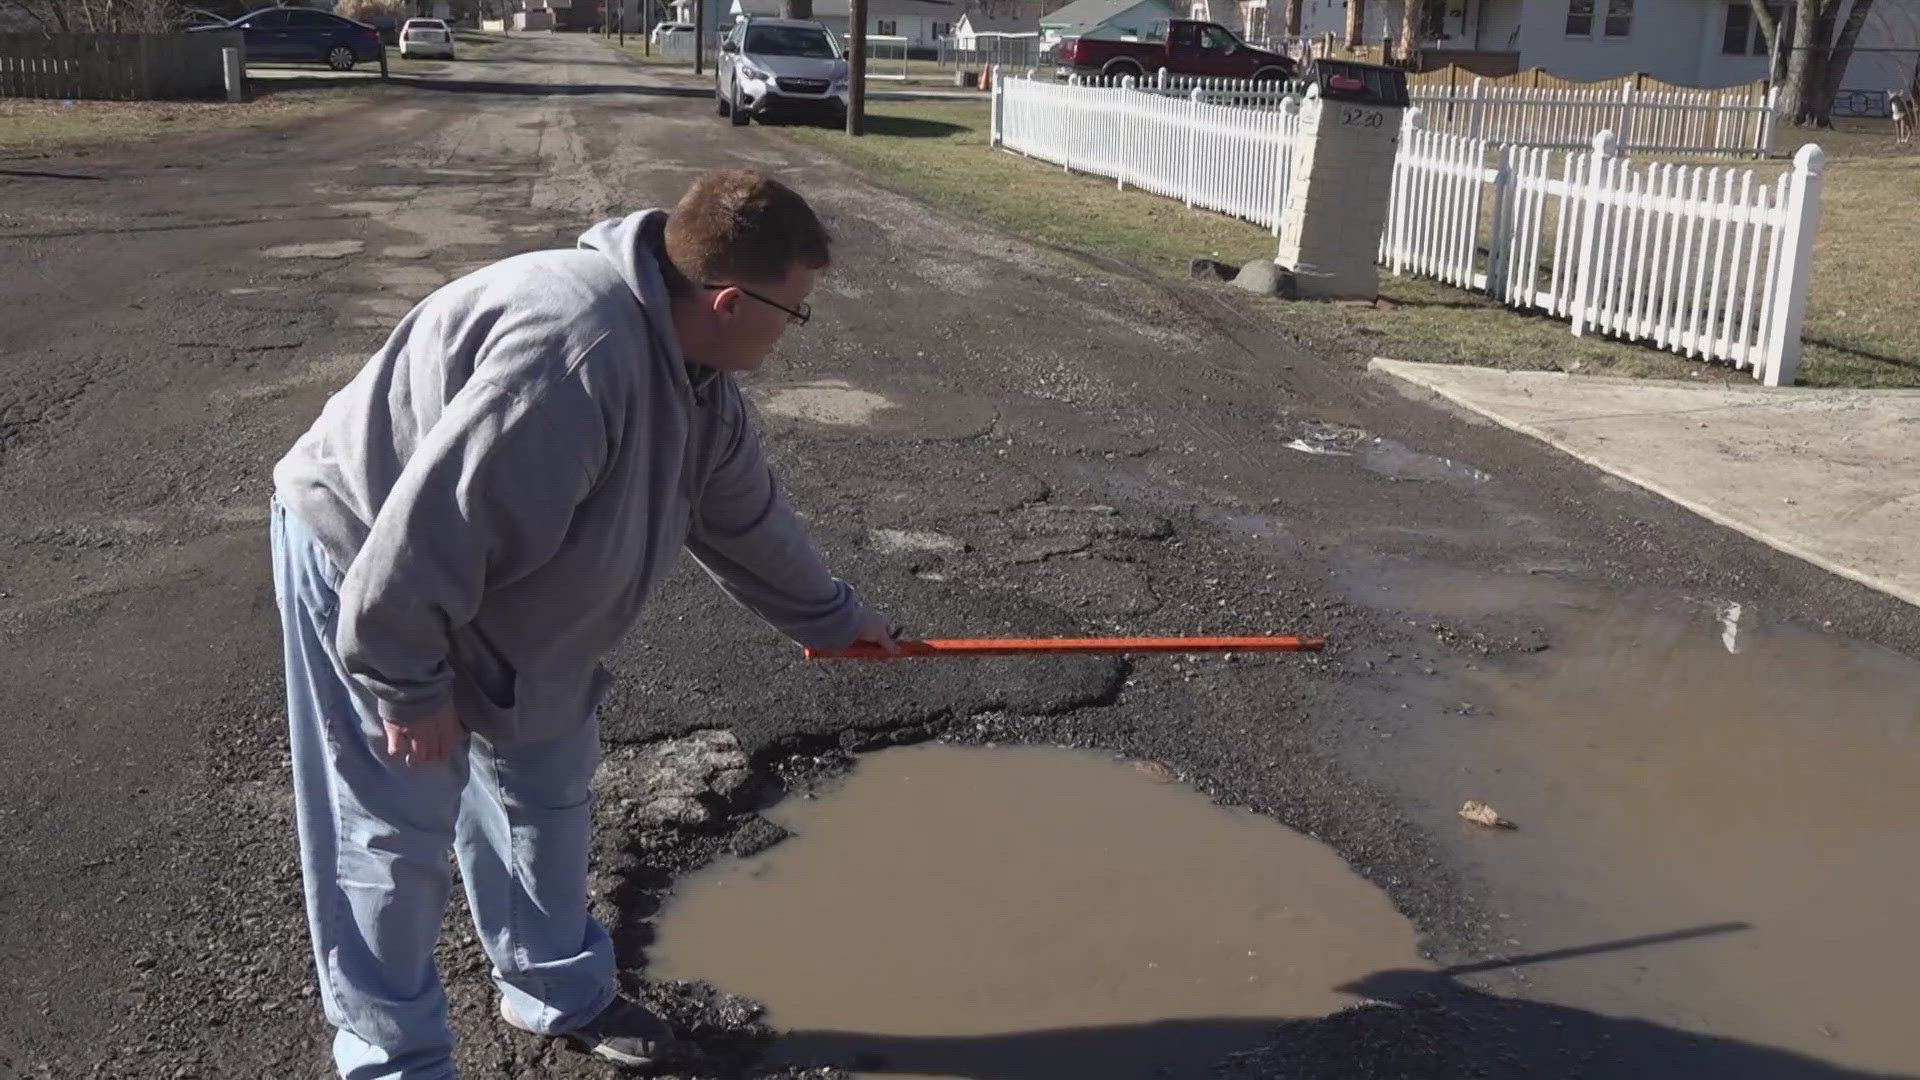 13News first brought you the story in February after those living in the area complained about the condition of the west Indianapolis street.